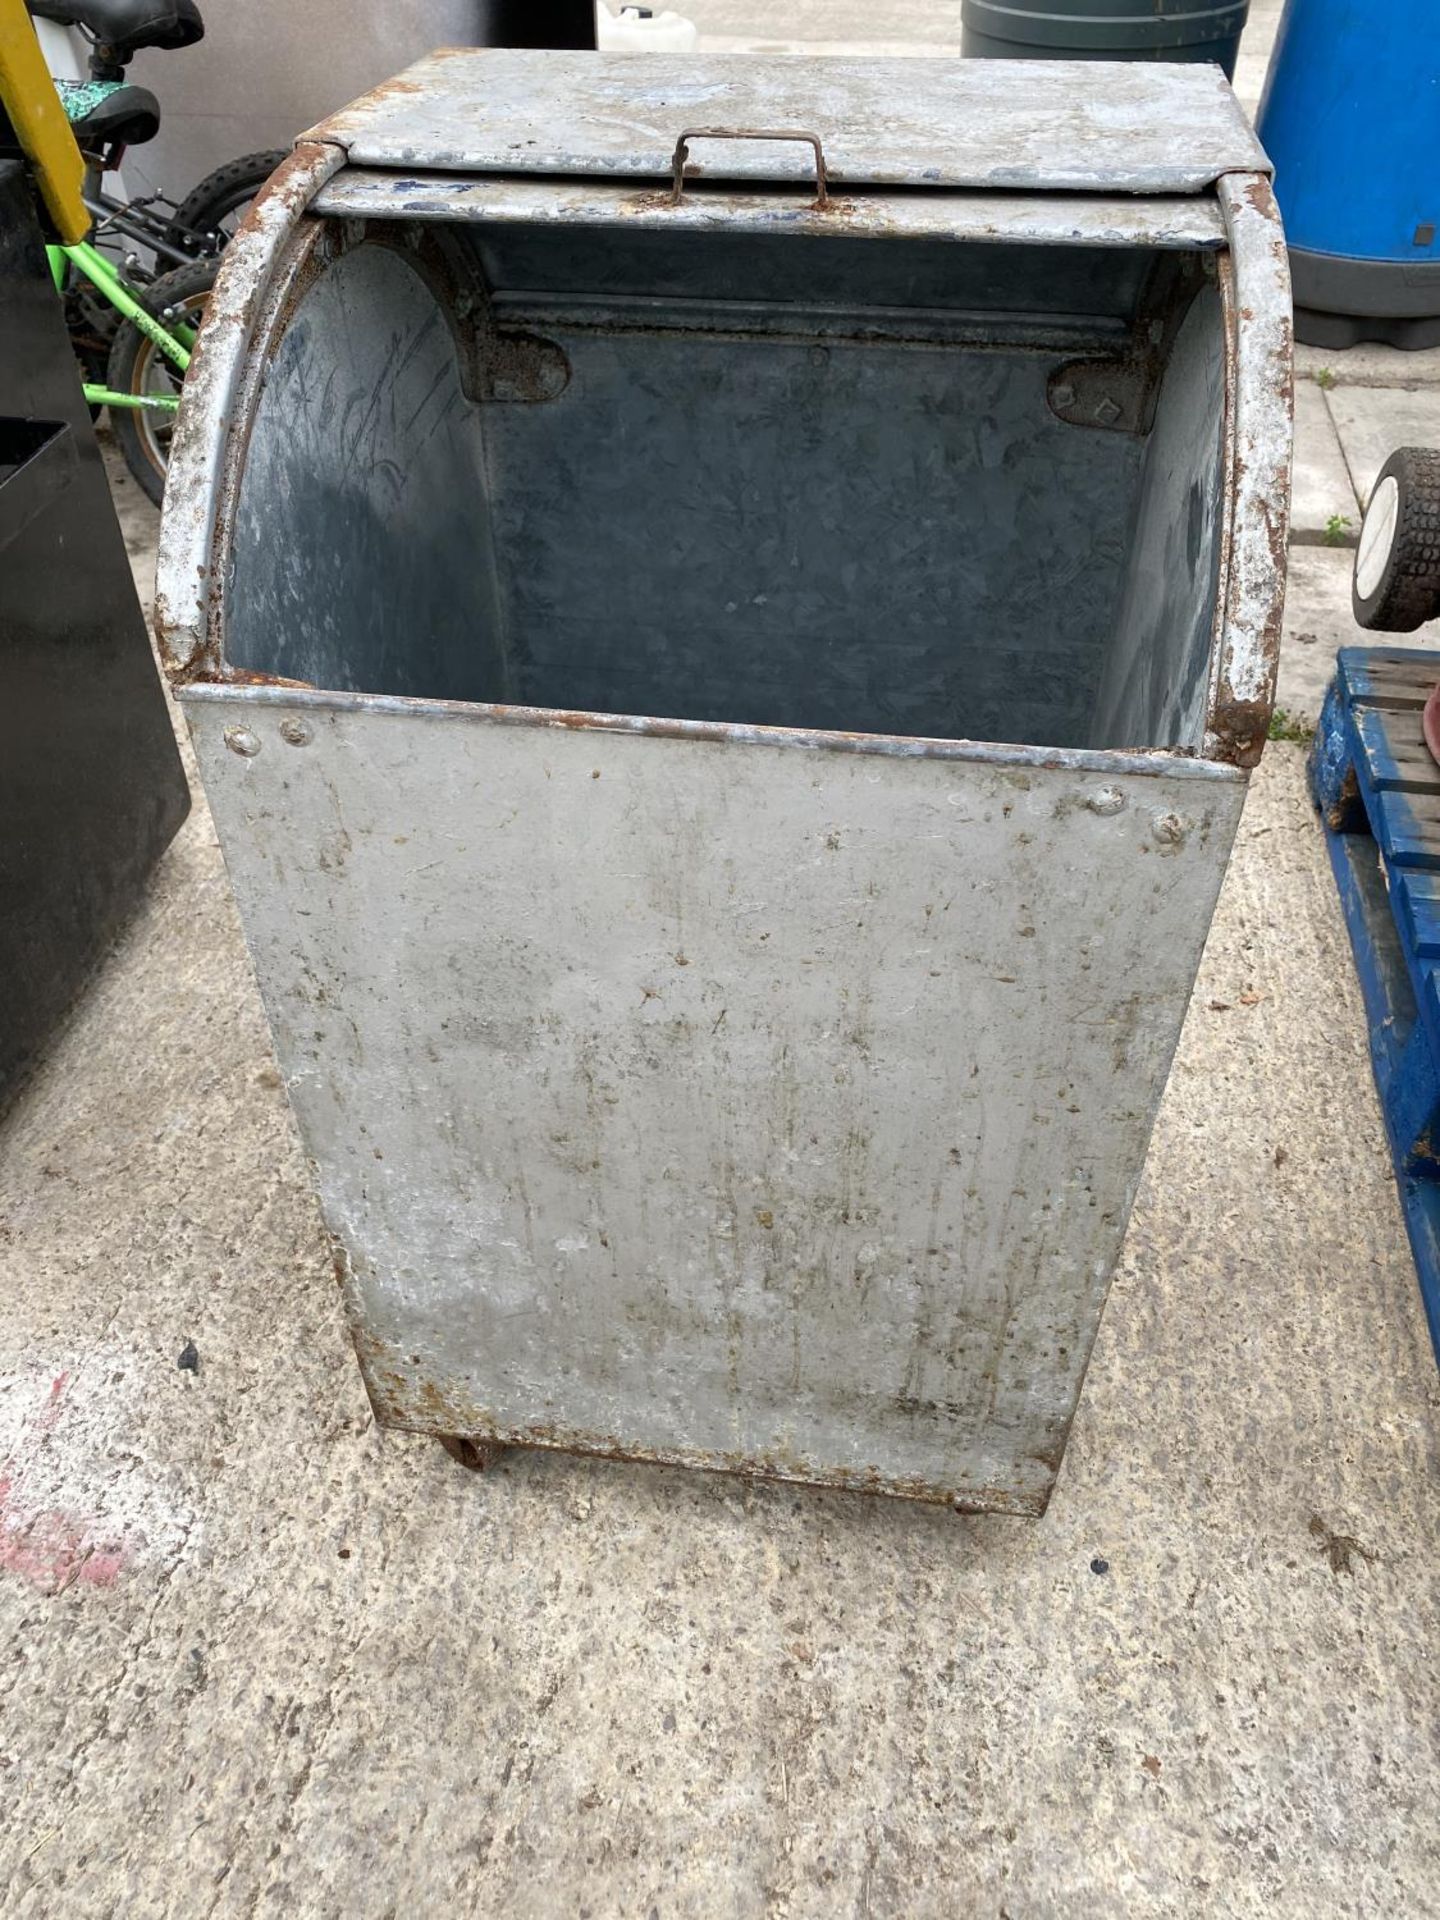 A WASTE BIN 18" SQUARE 32" HIGH WITH FLOOR NO VAT - Image 3 of 5